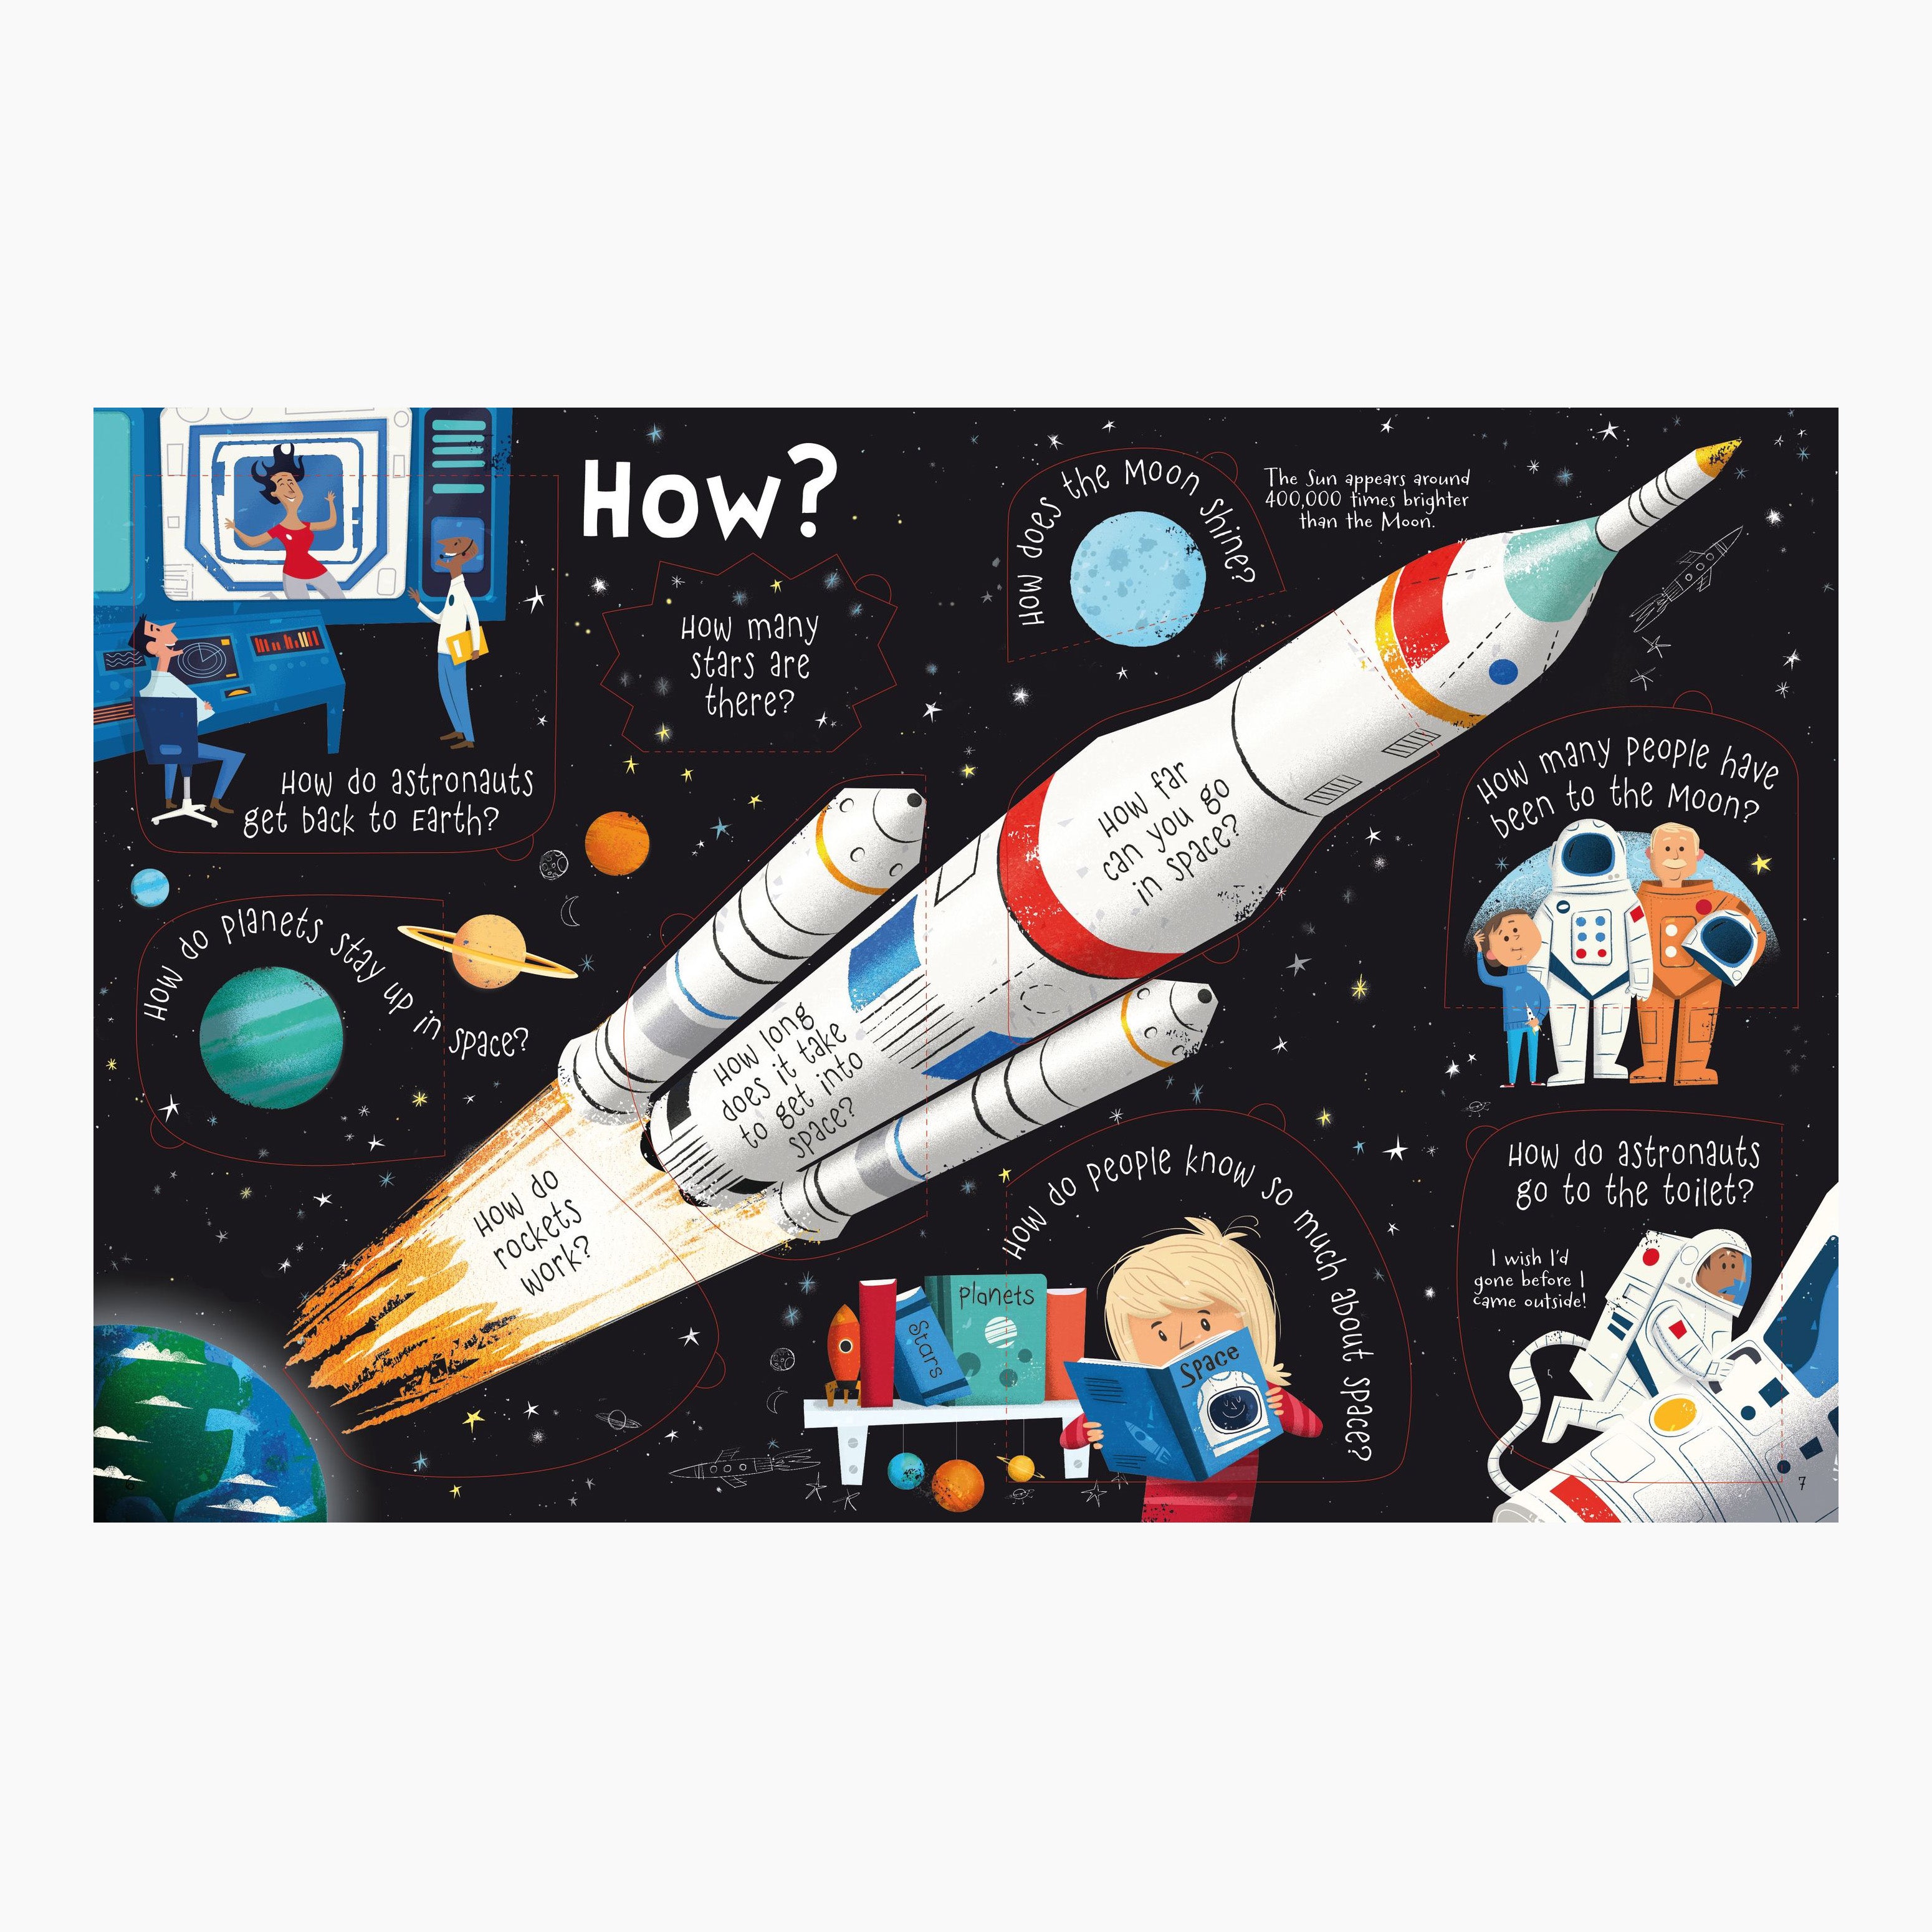 Lift-the-Flap: Questions and Answers about Space